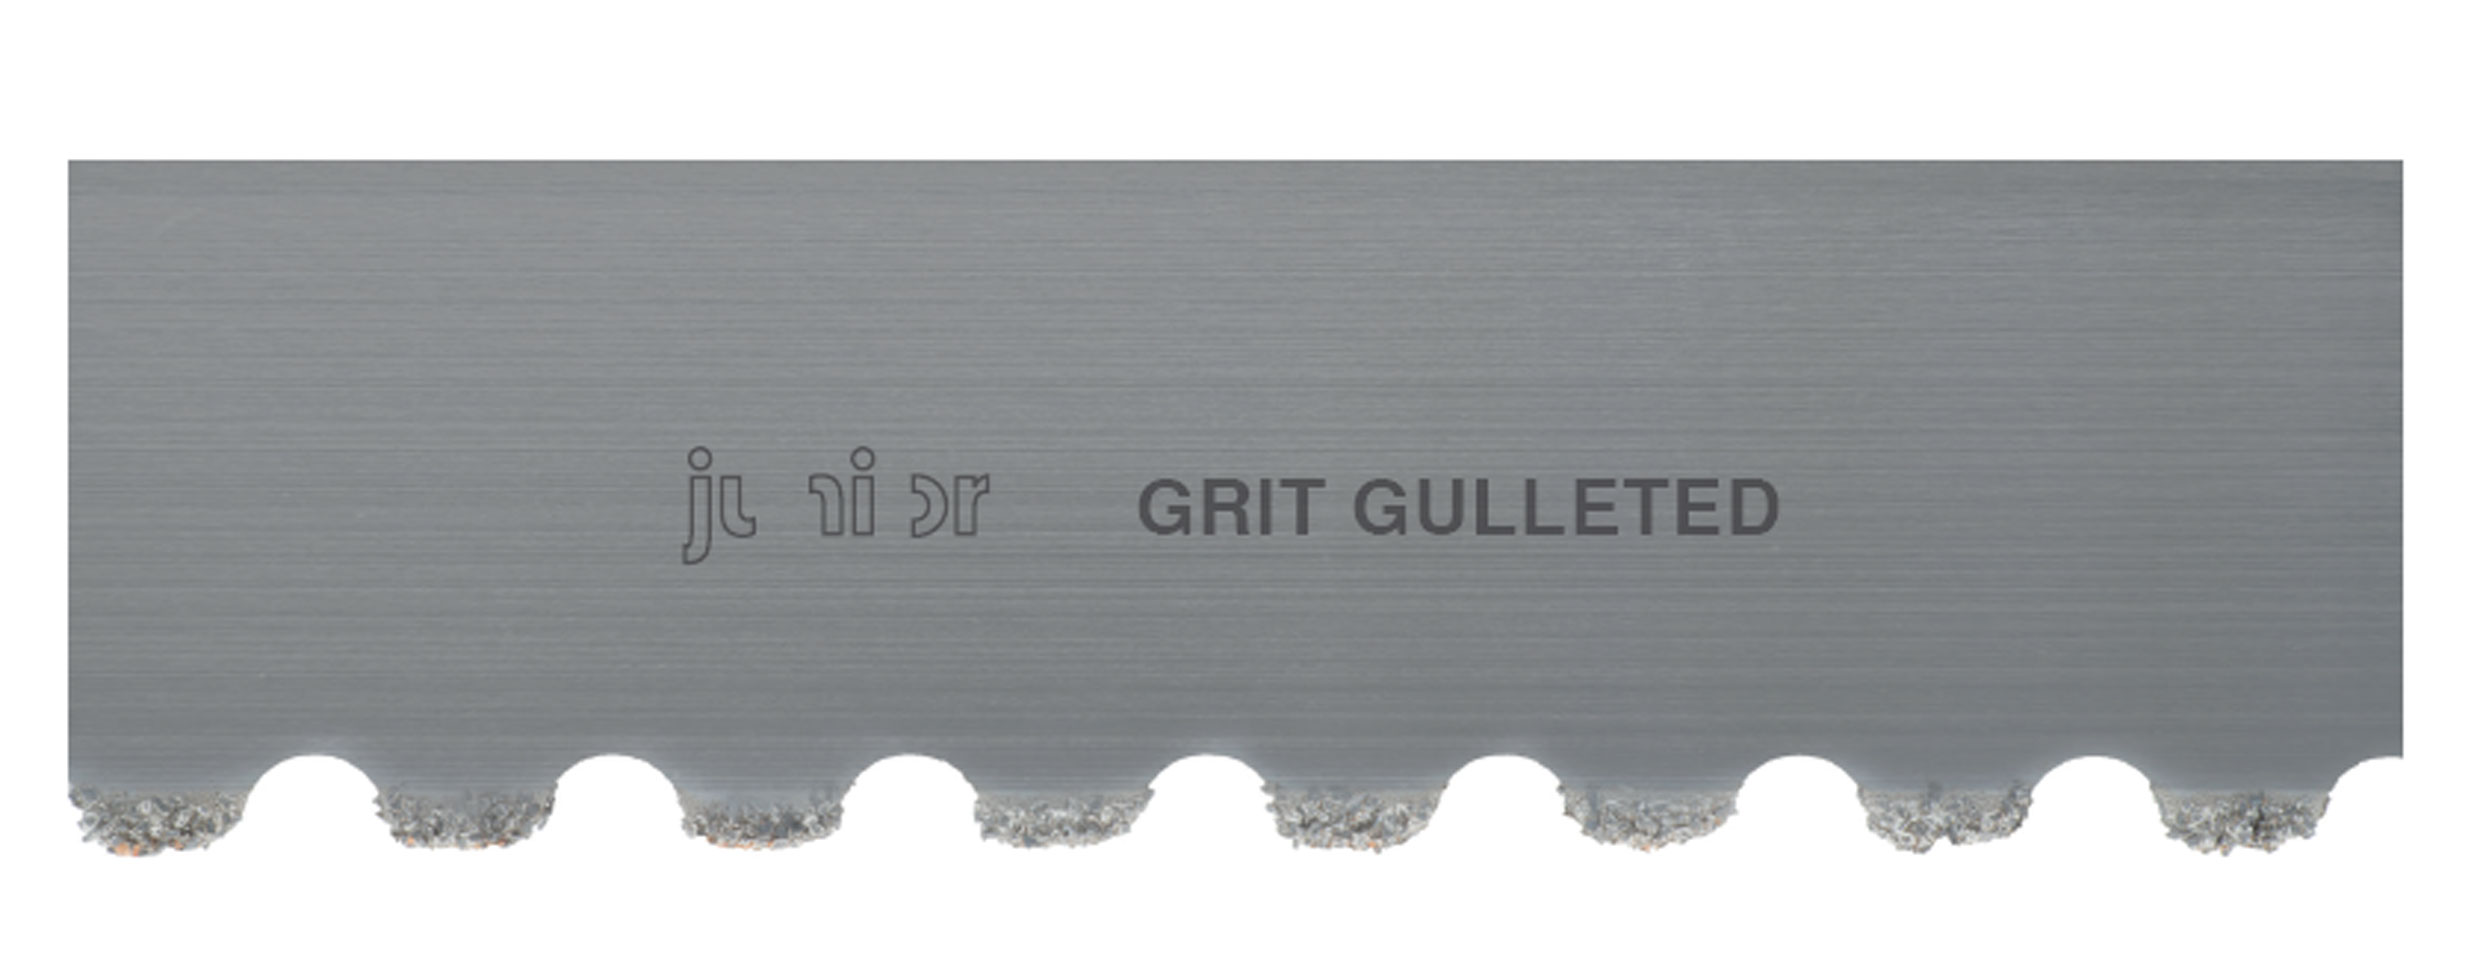 GRIT GULLETED / No. 371